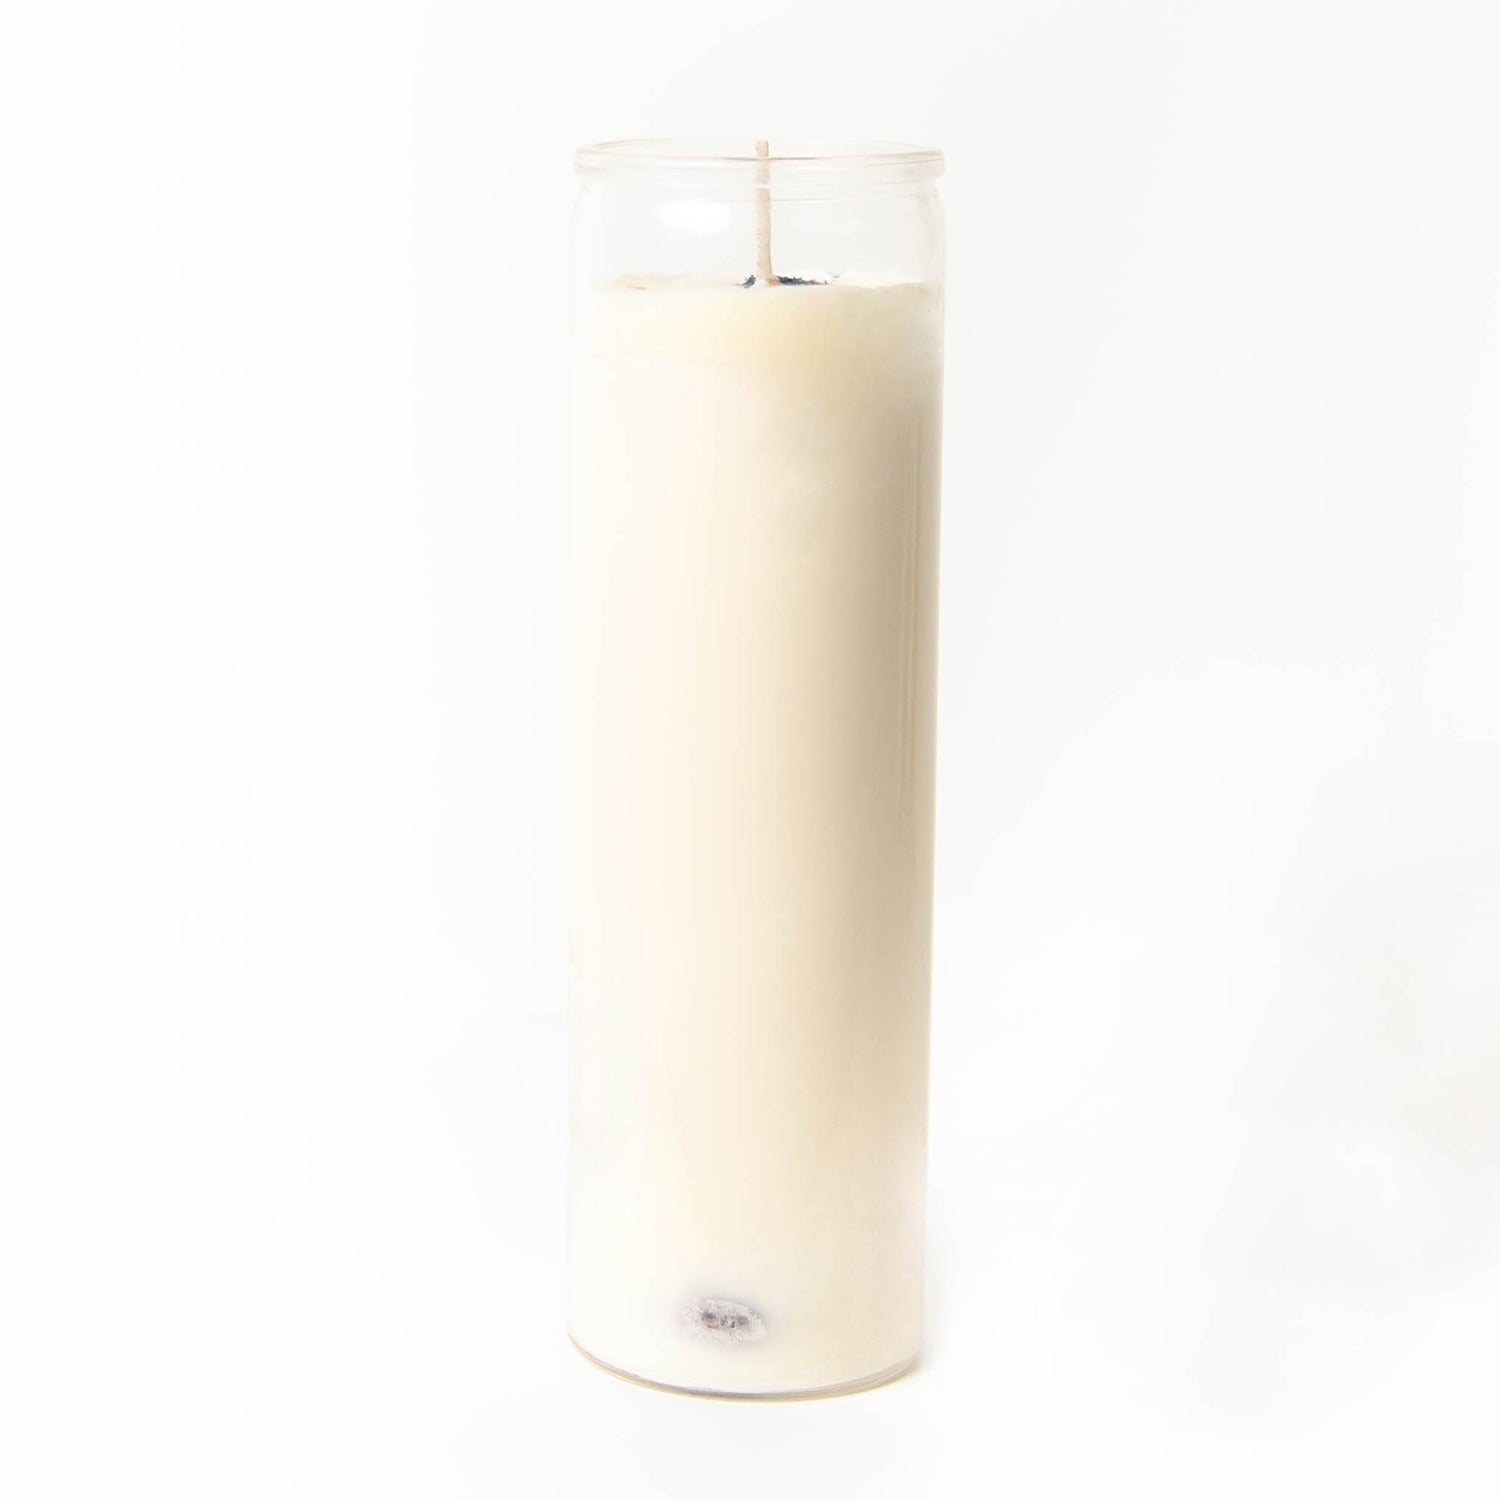 Home Ritual Candle - Large